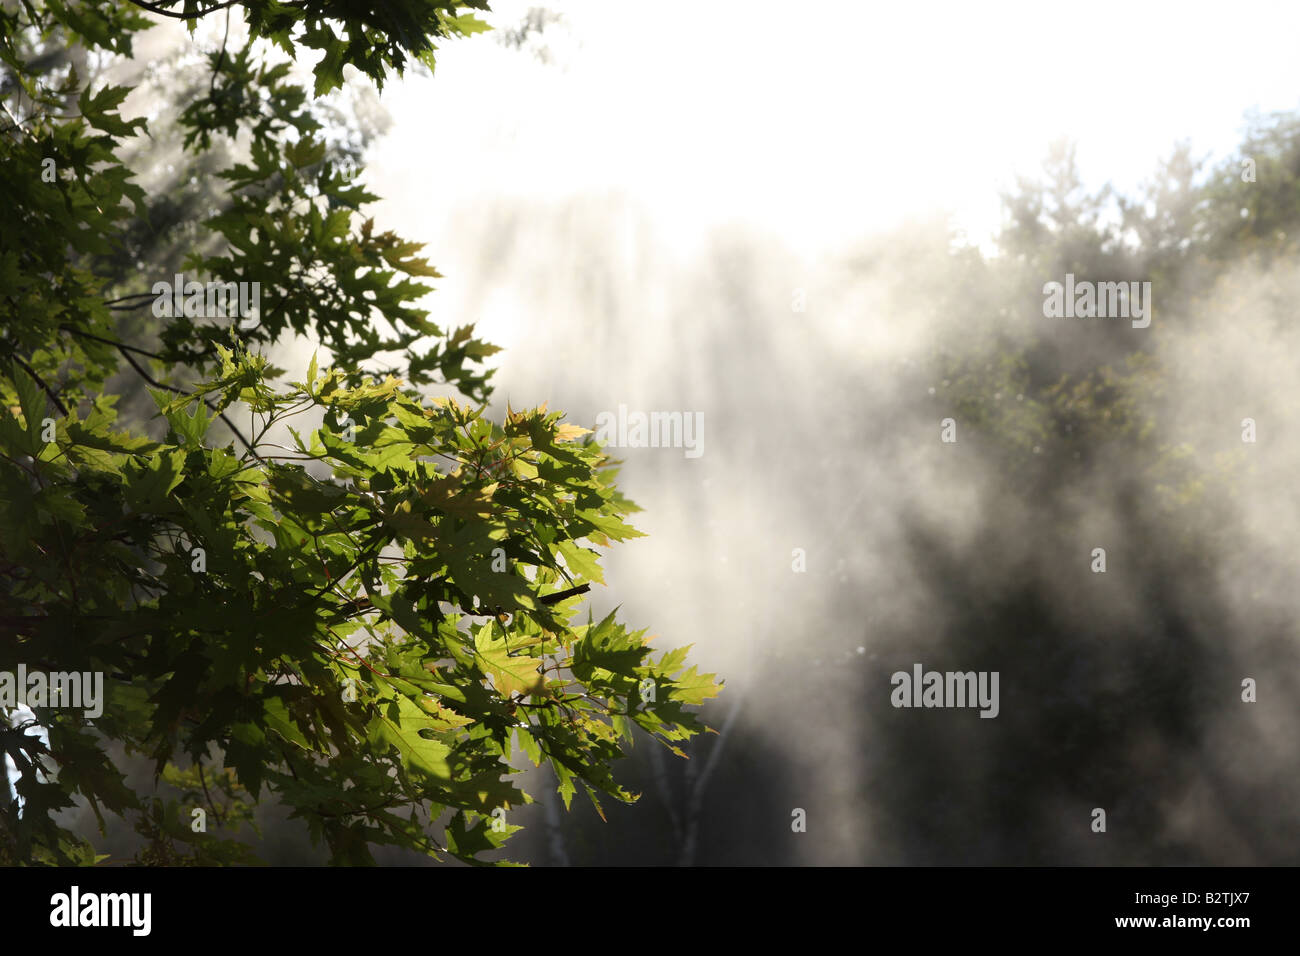 Maple leaves in the smoke and sunlight Stock Photo